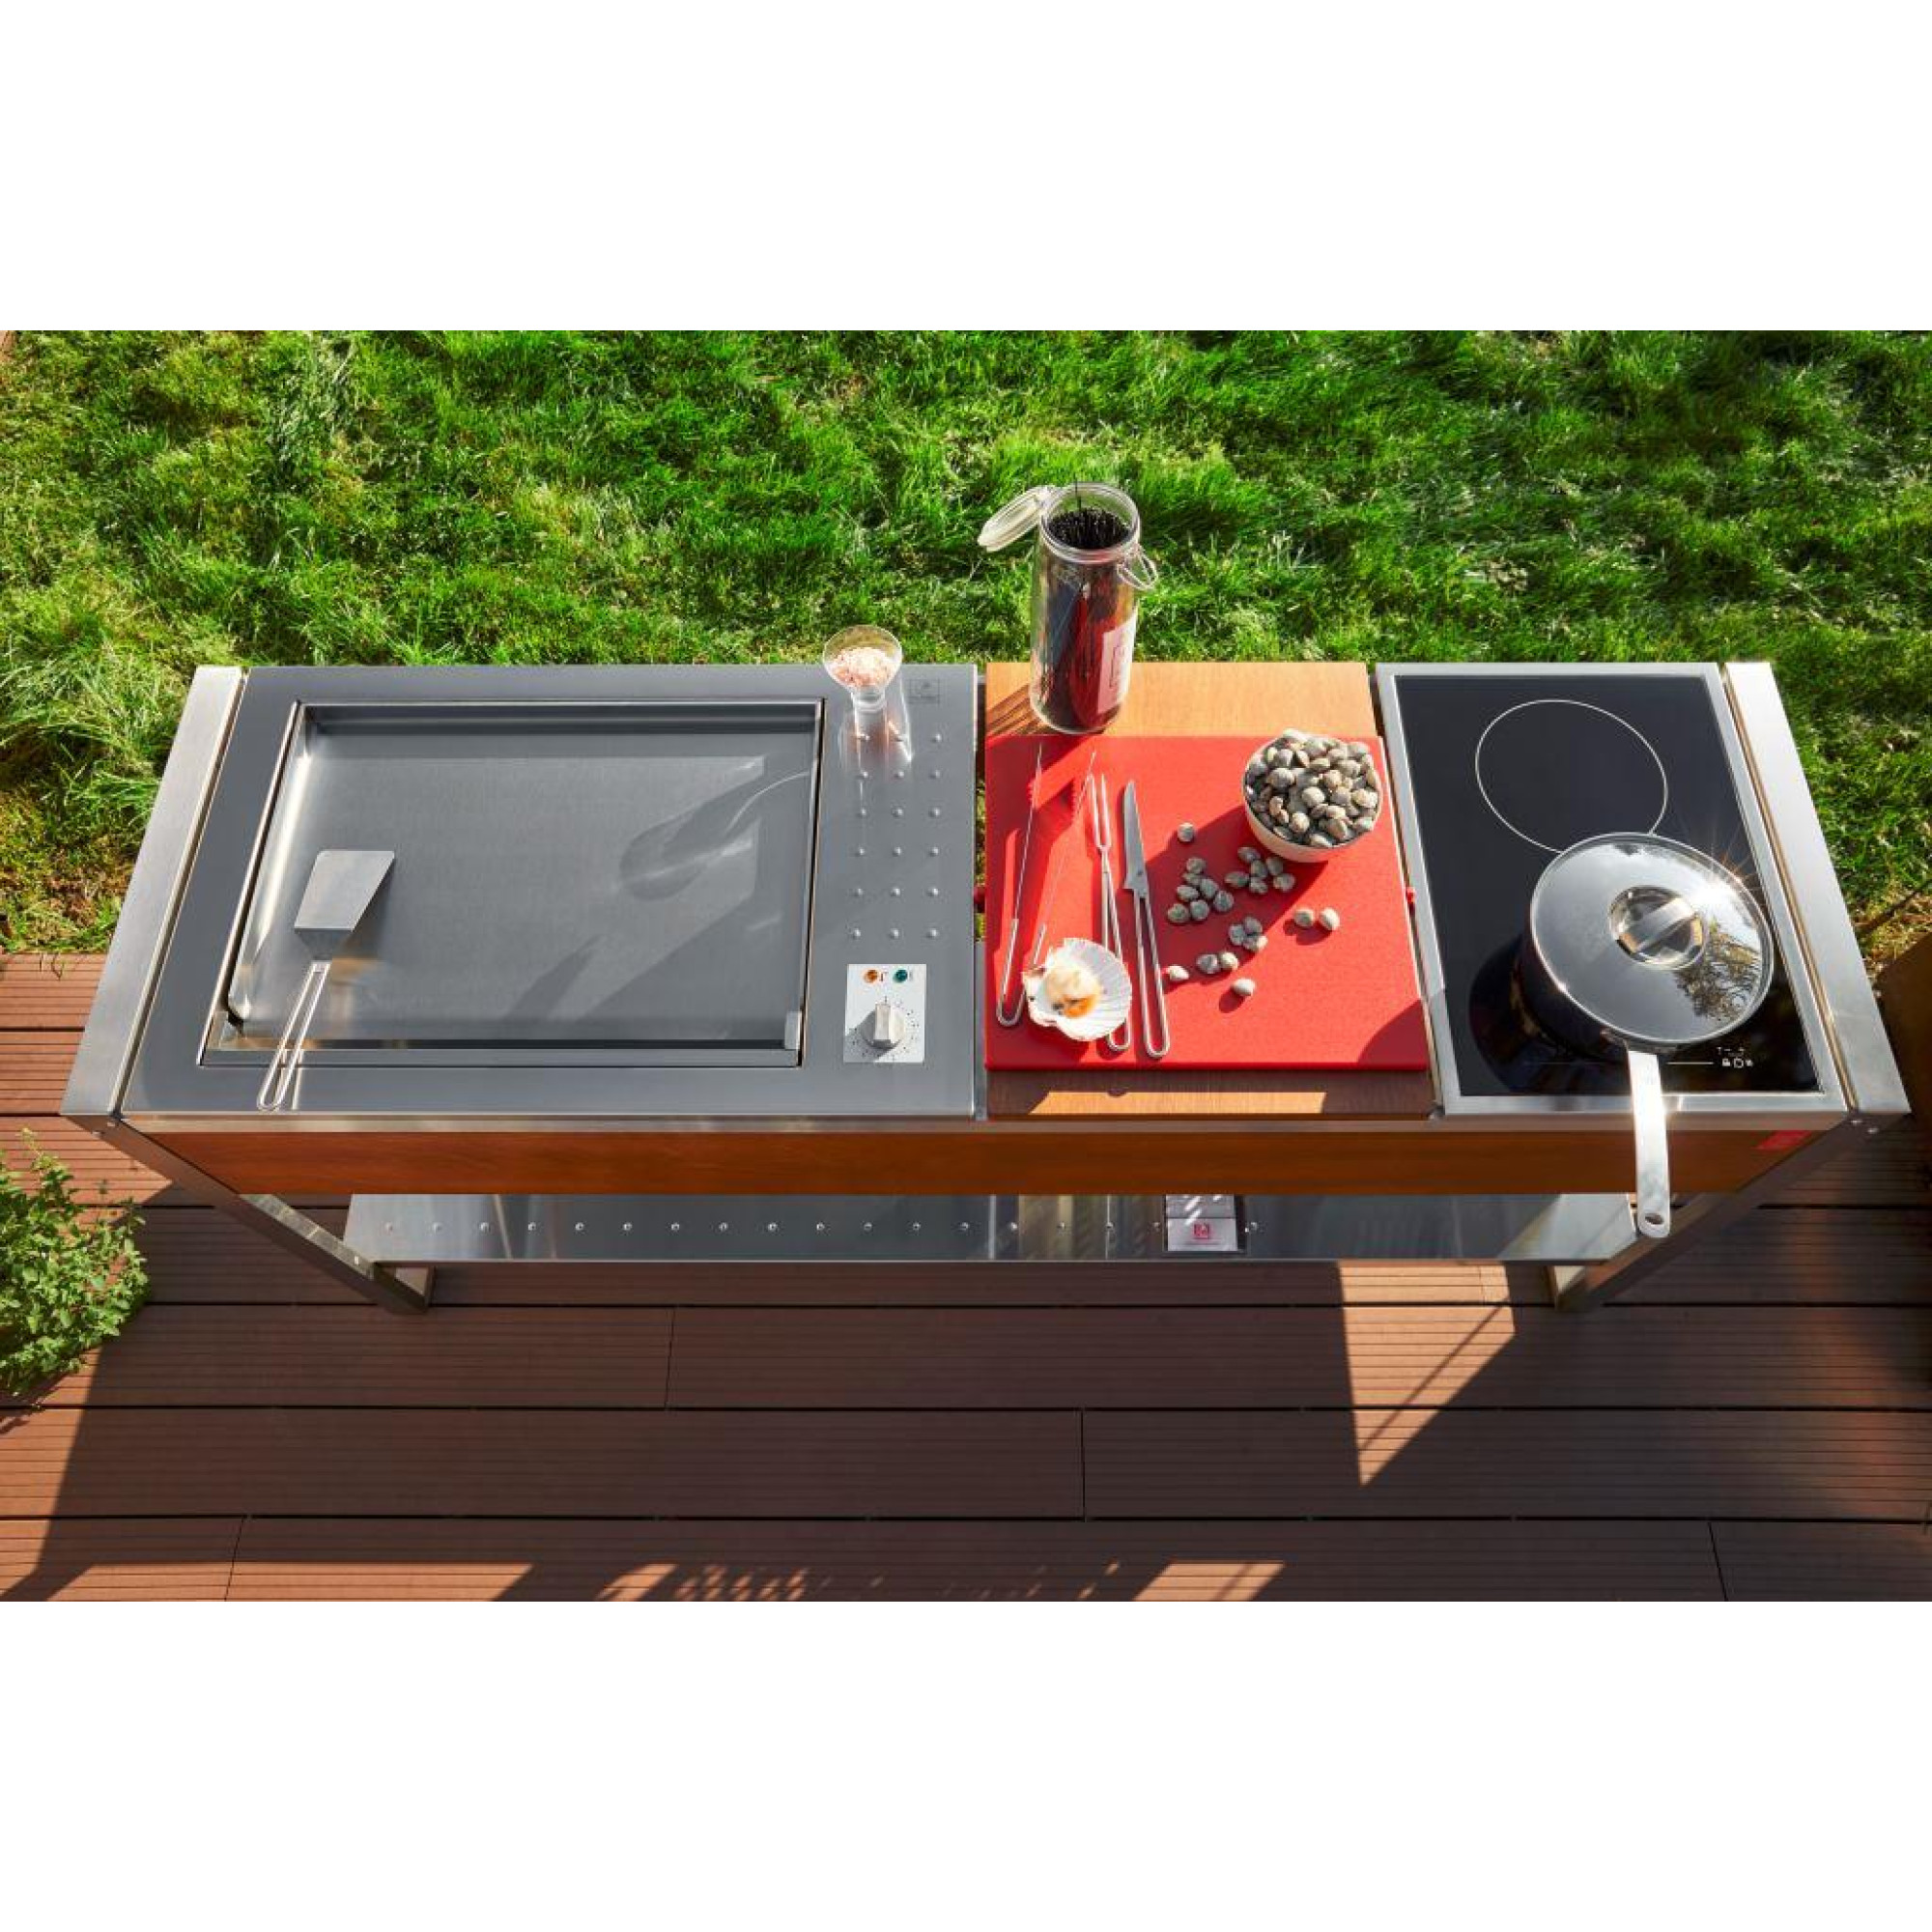 Oasi 183 Outdoor Kitchens Cooking System Planet Masonionline